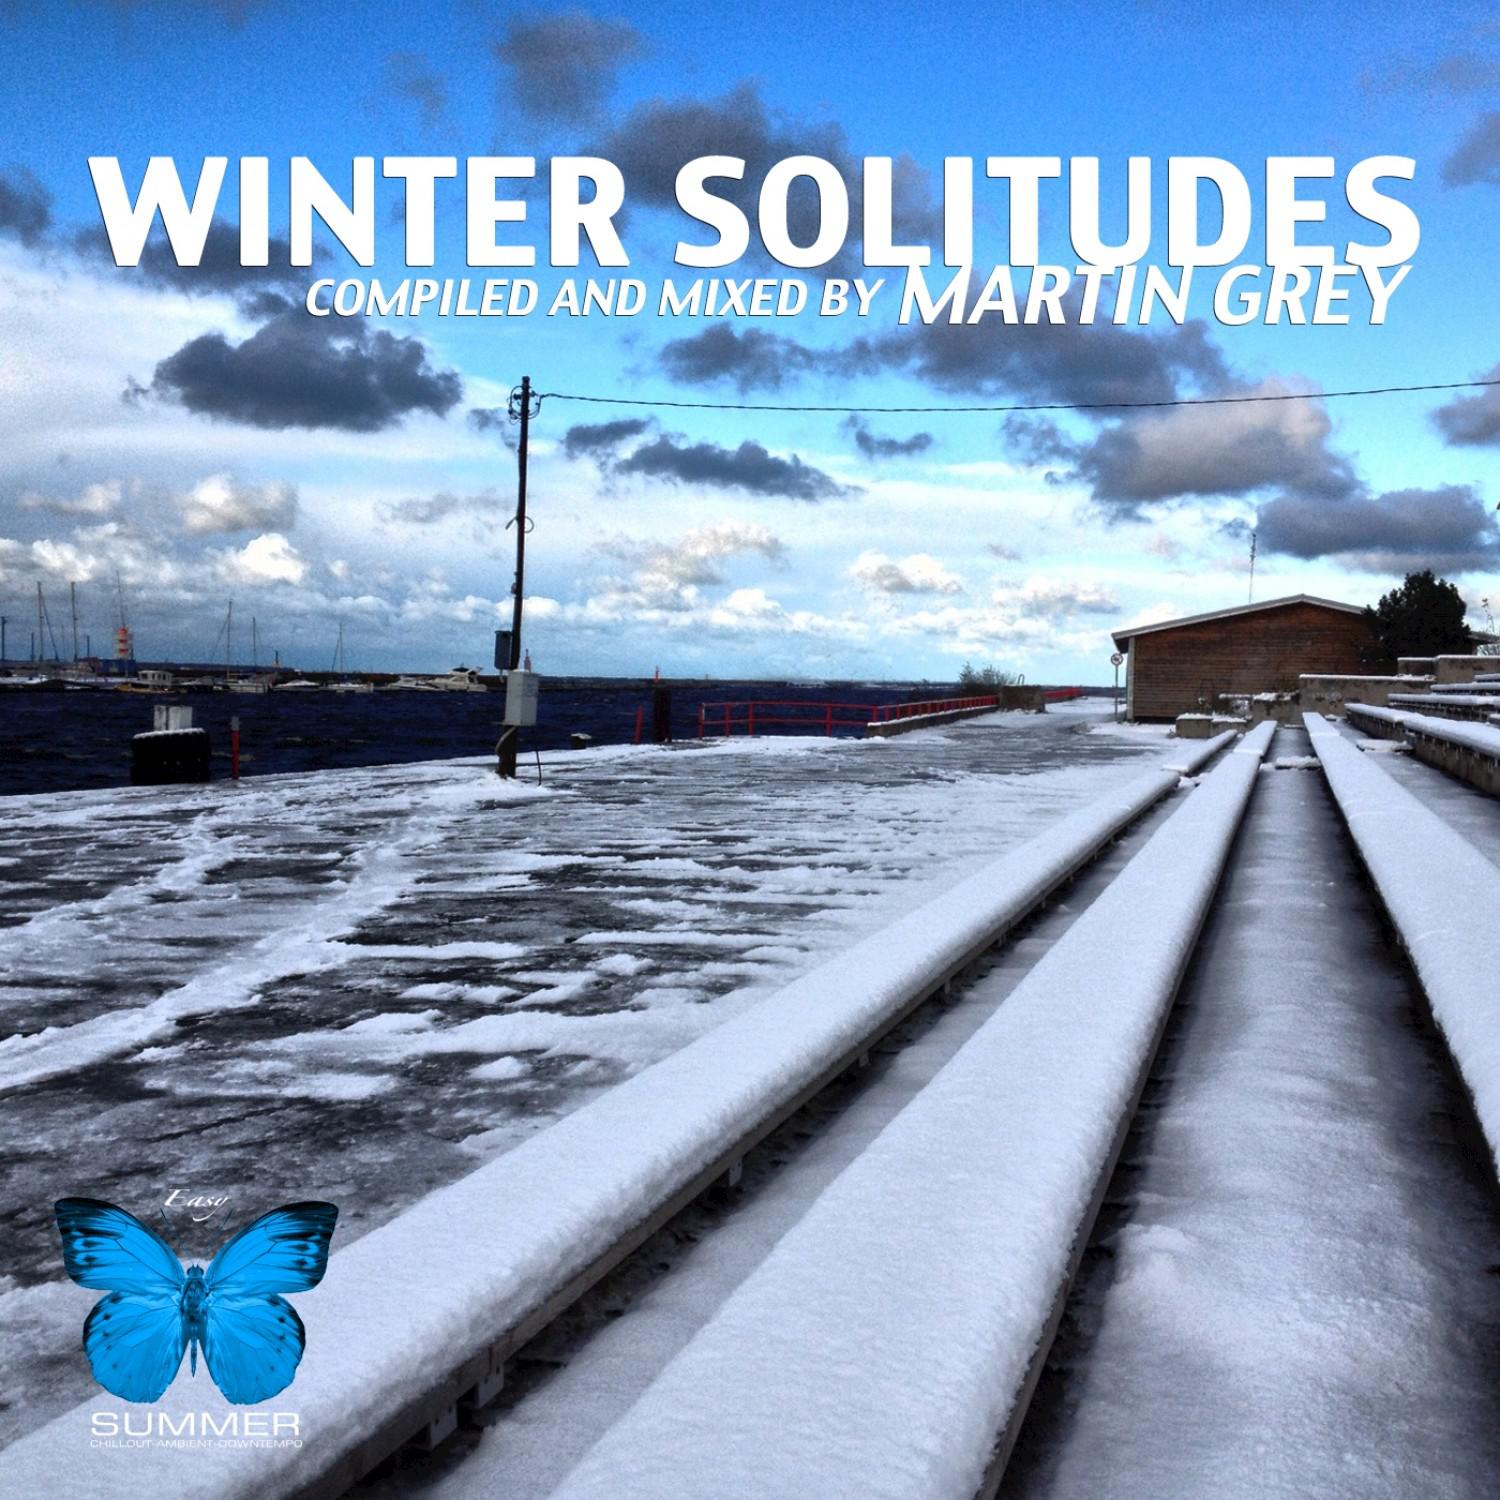 Winter Solitudes (Compiled by Martin Grey)